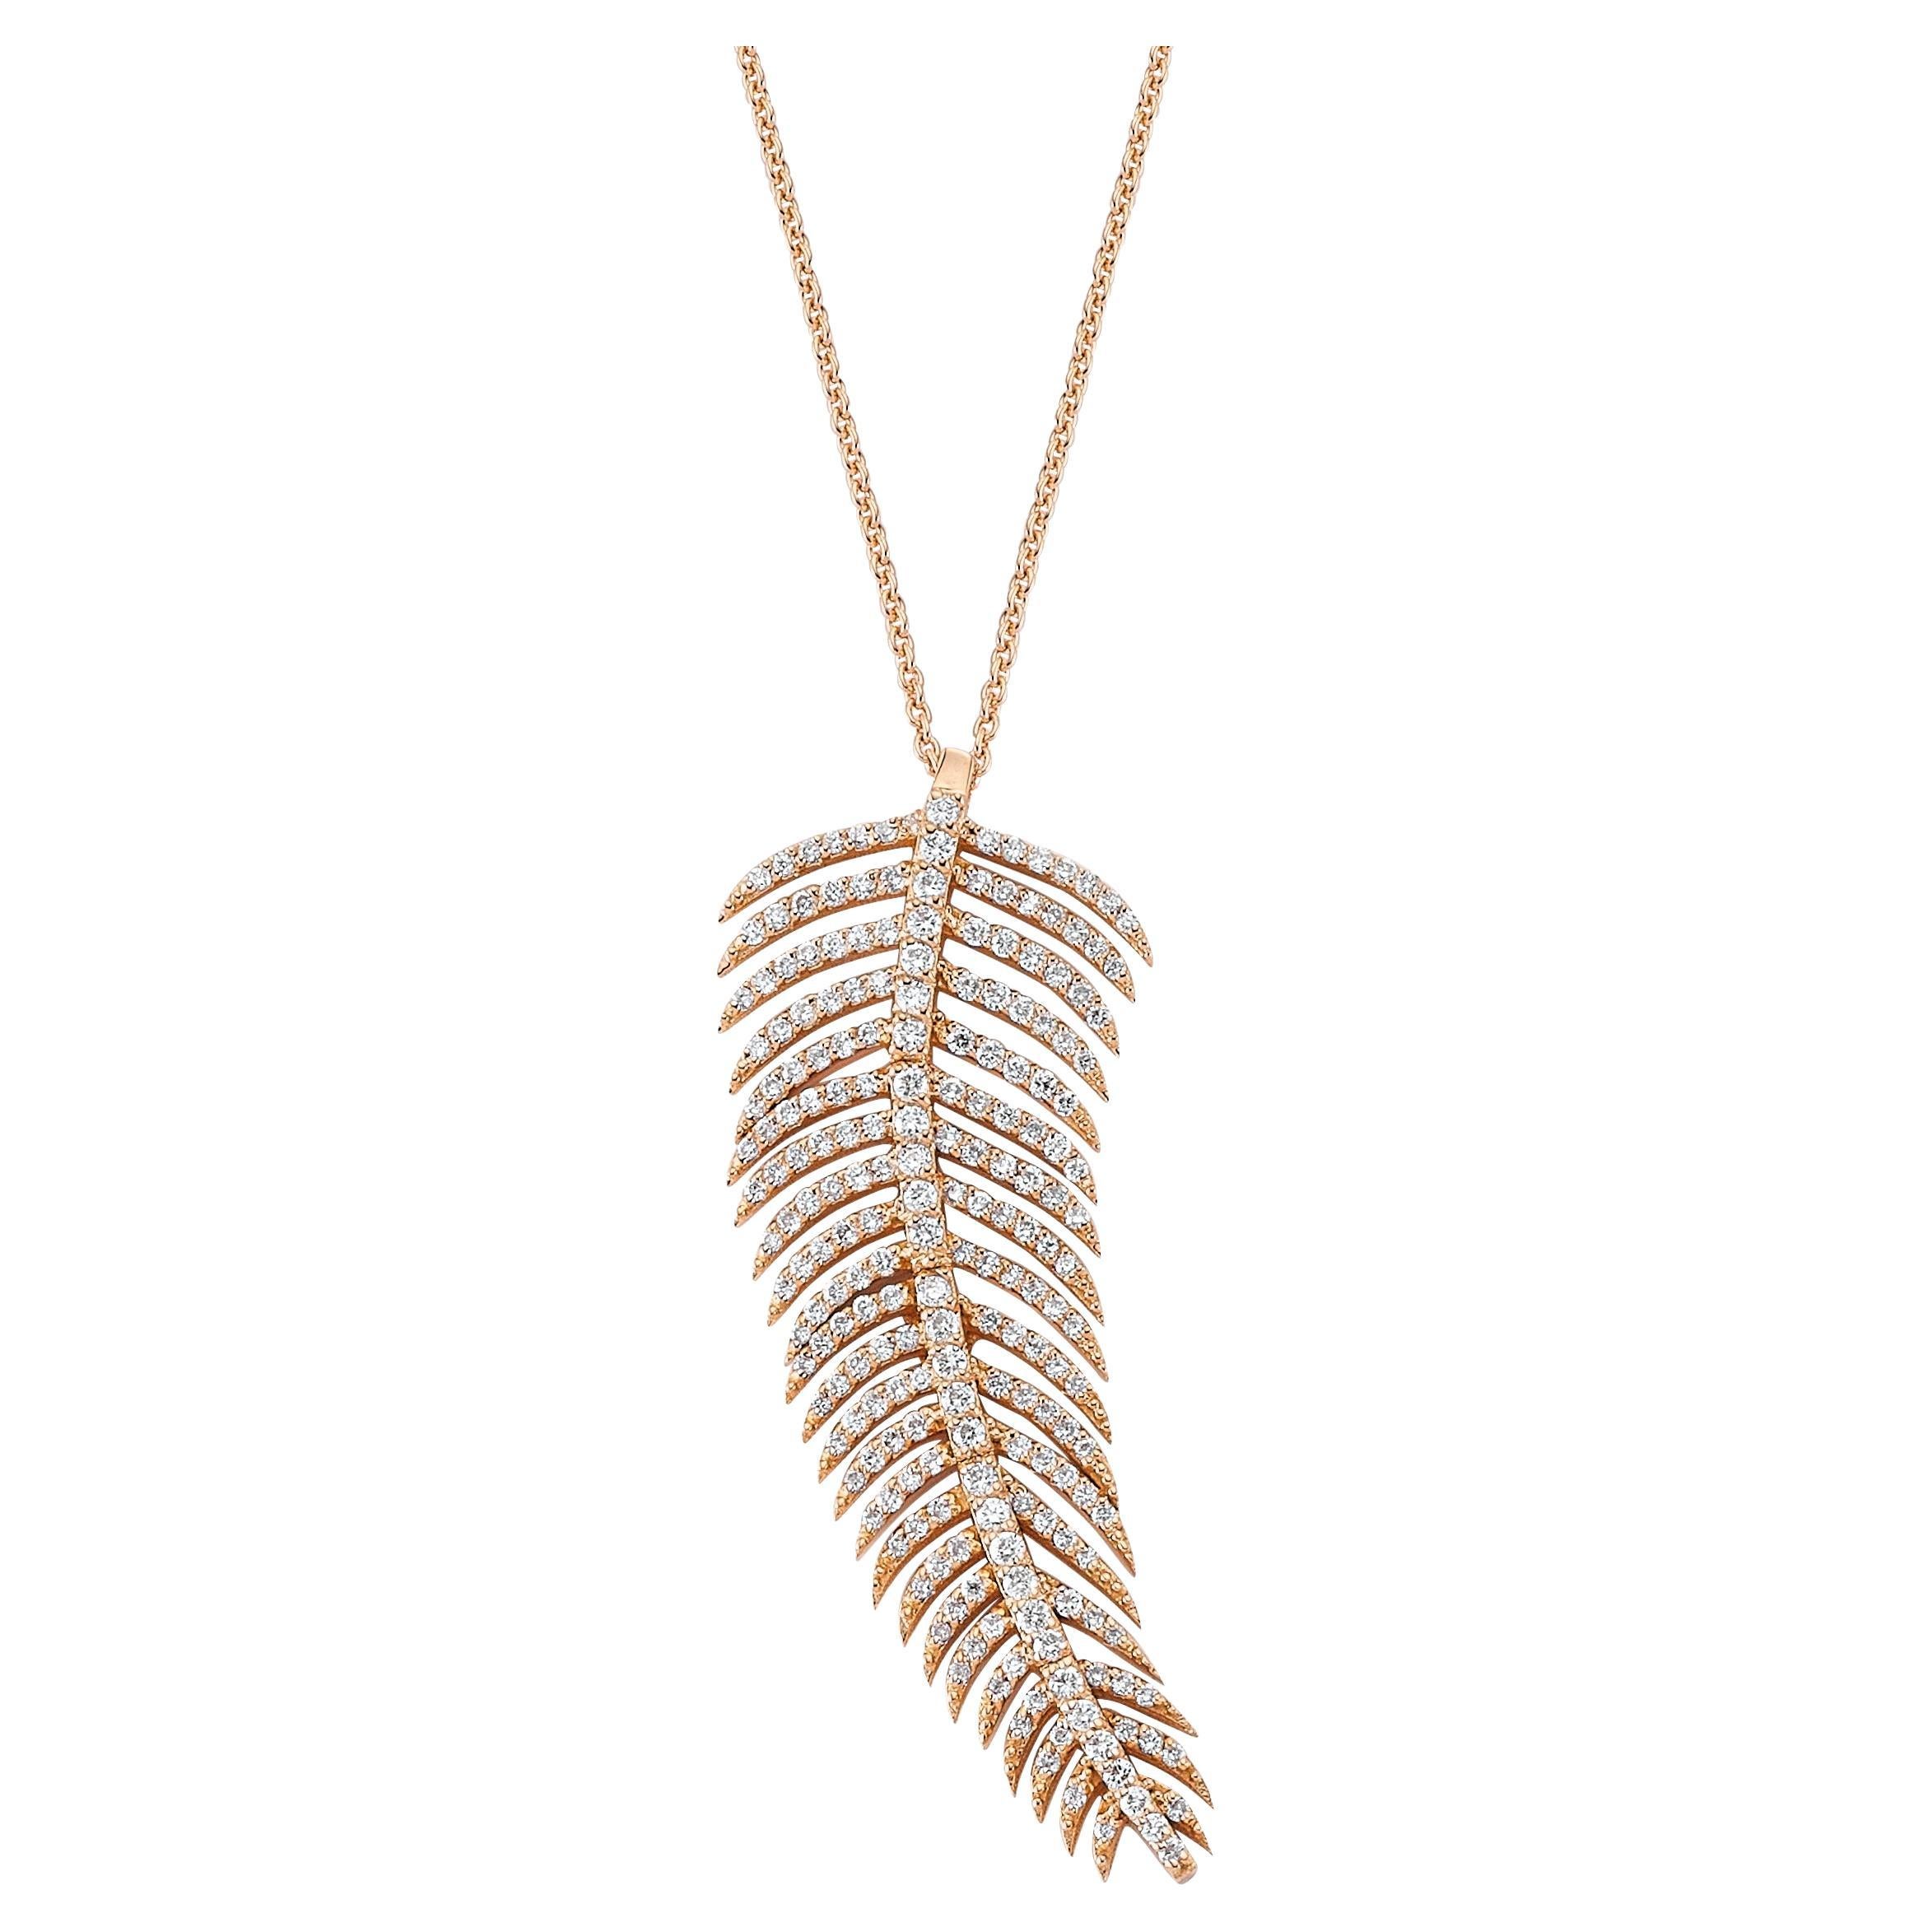 Charms Company Medium Size Feather Necklace in 18k Rose Gold with 1.0 ct Diamond For Sale